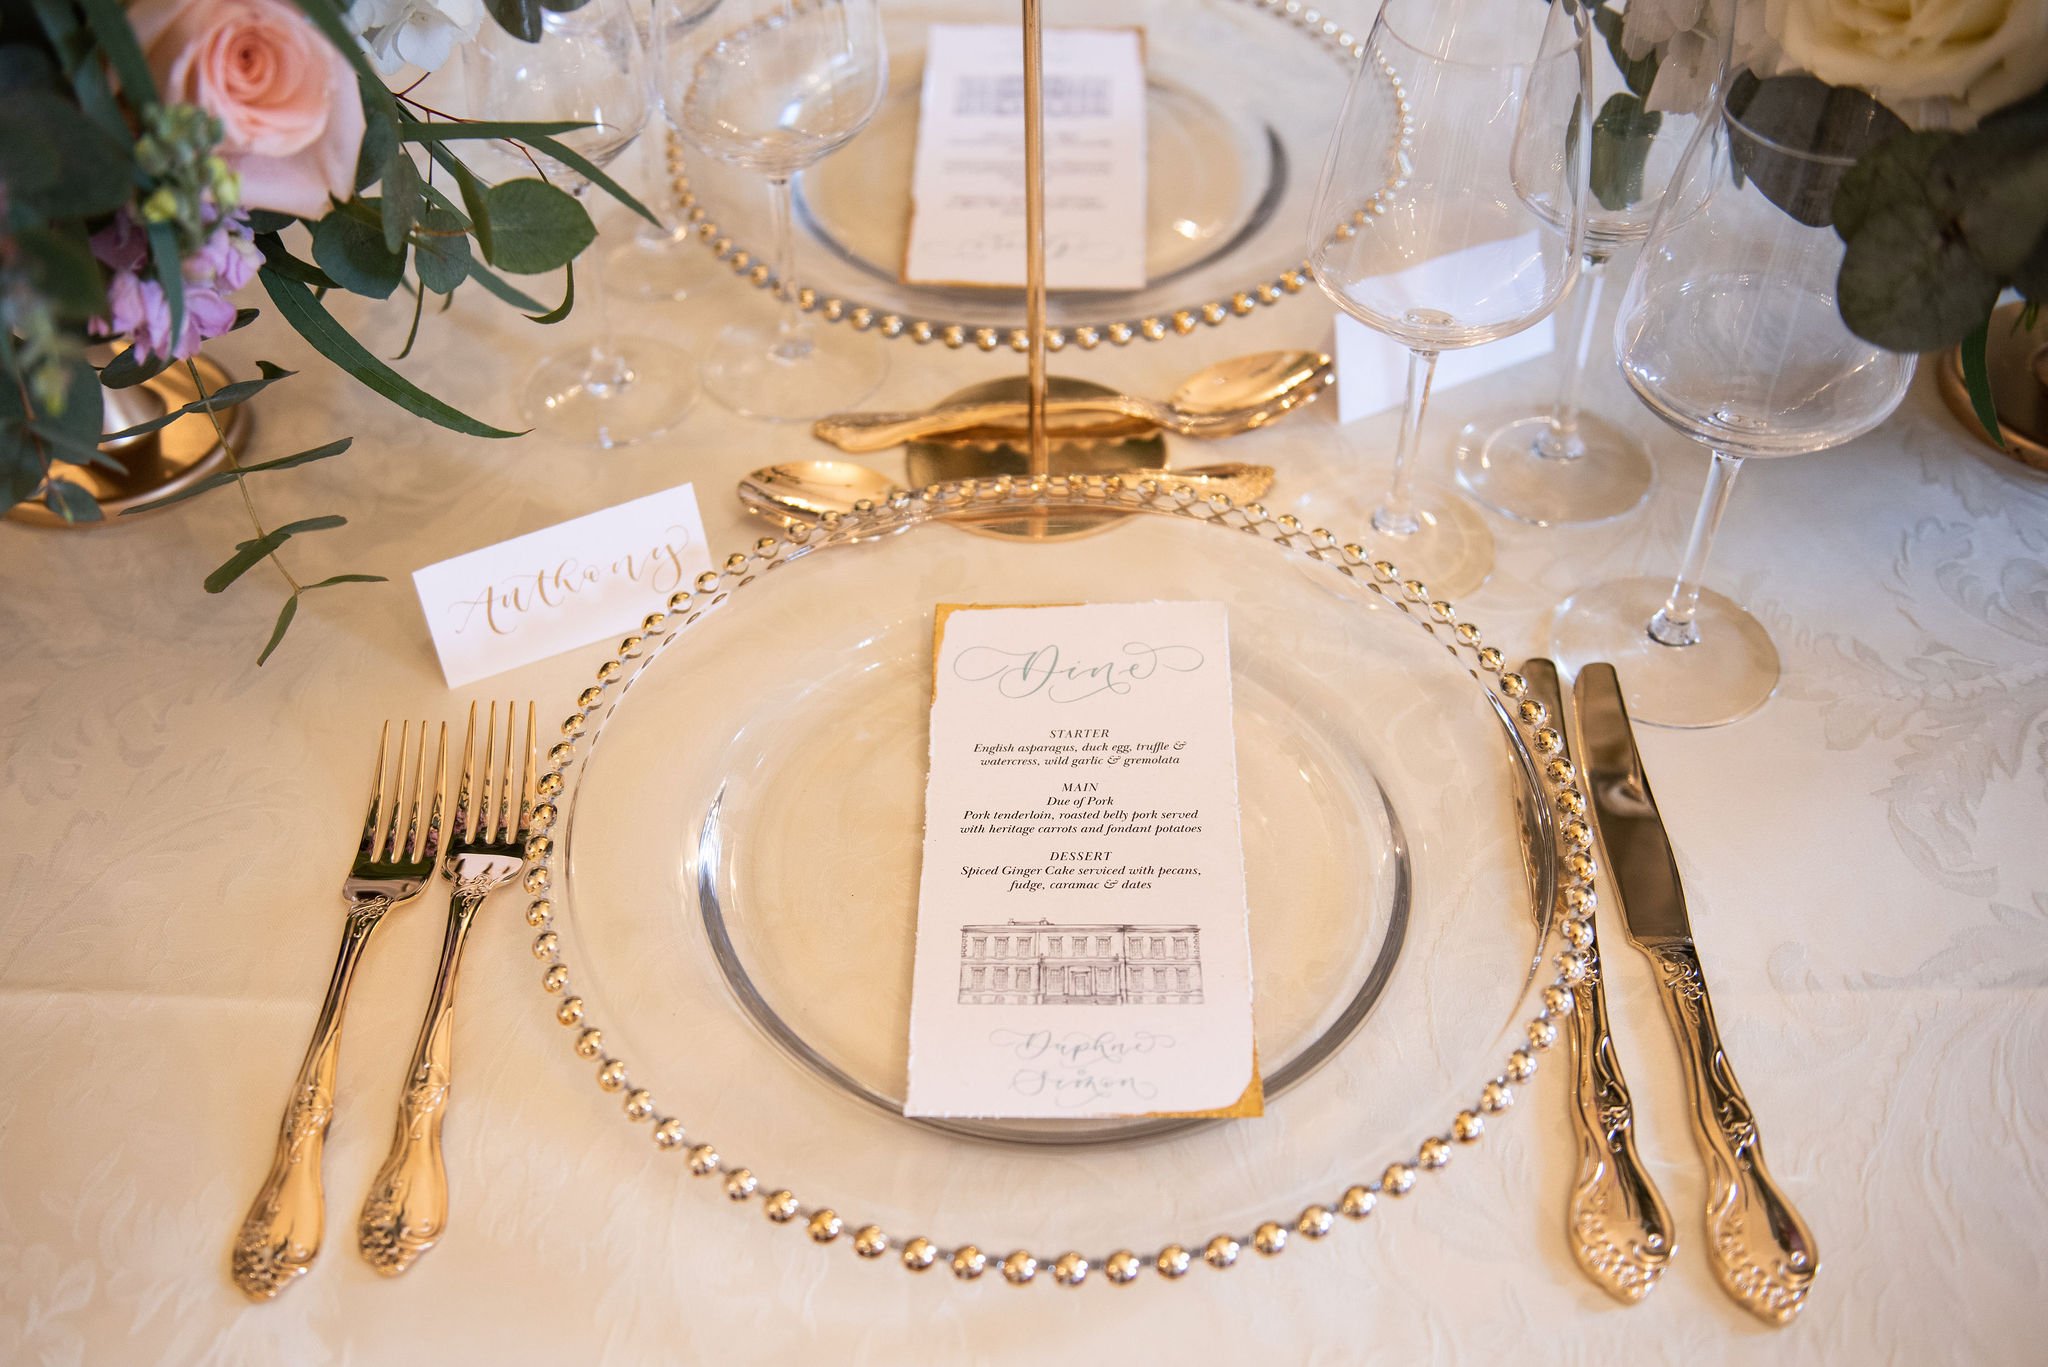 Bridgerton wedding stationery Calligraphy wedding menu for buxted park wedding with callgraphy and gold calligraphy placecard by The Amyverse.jpg